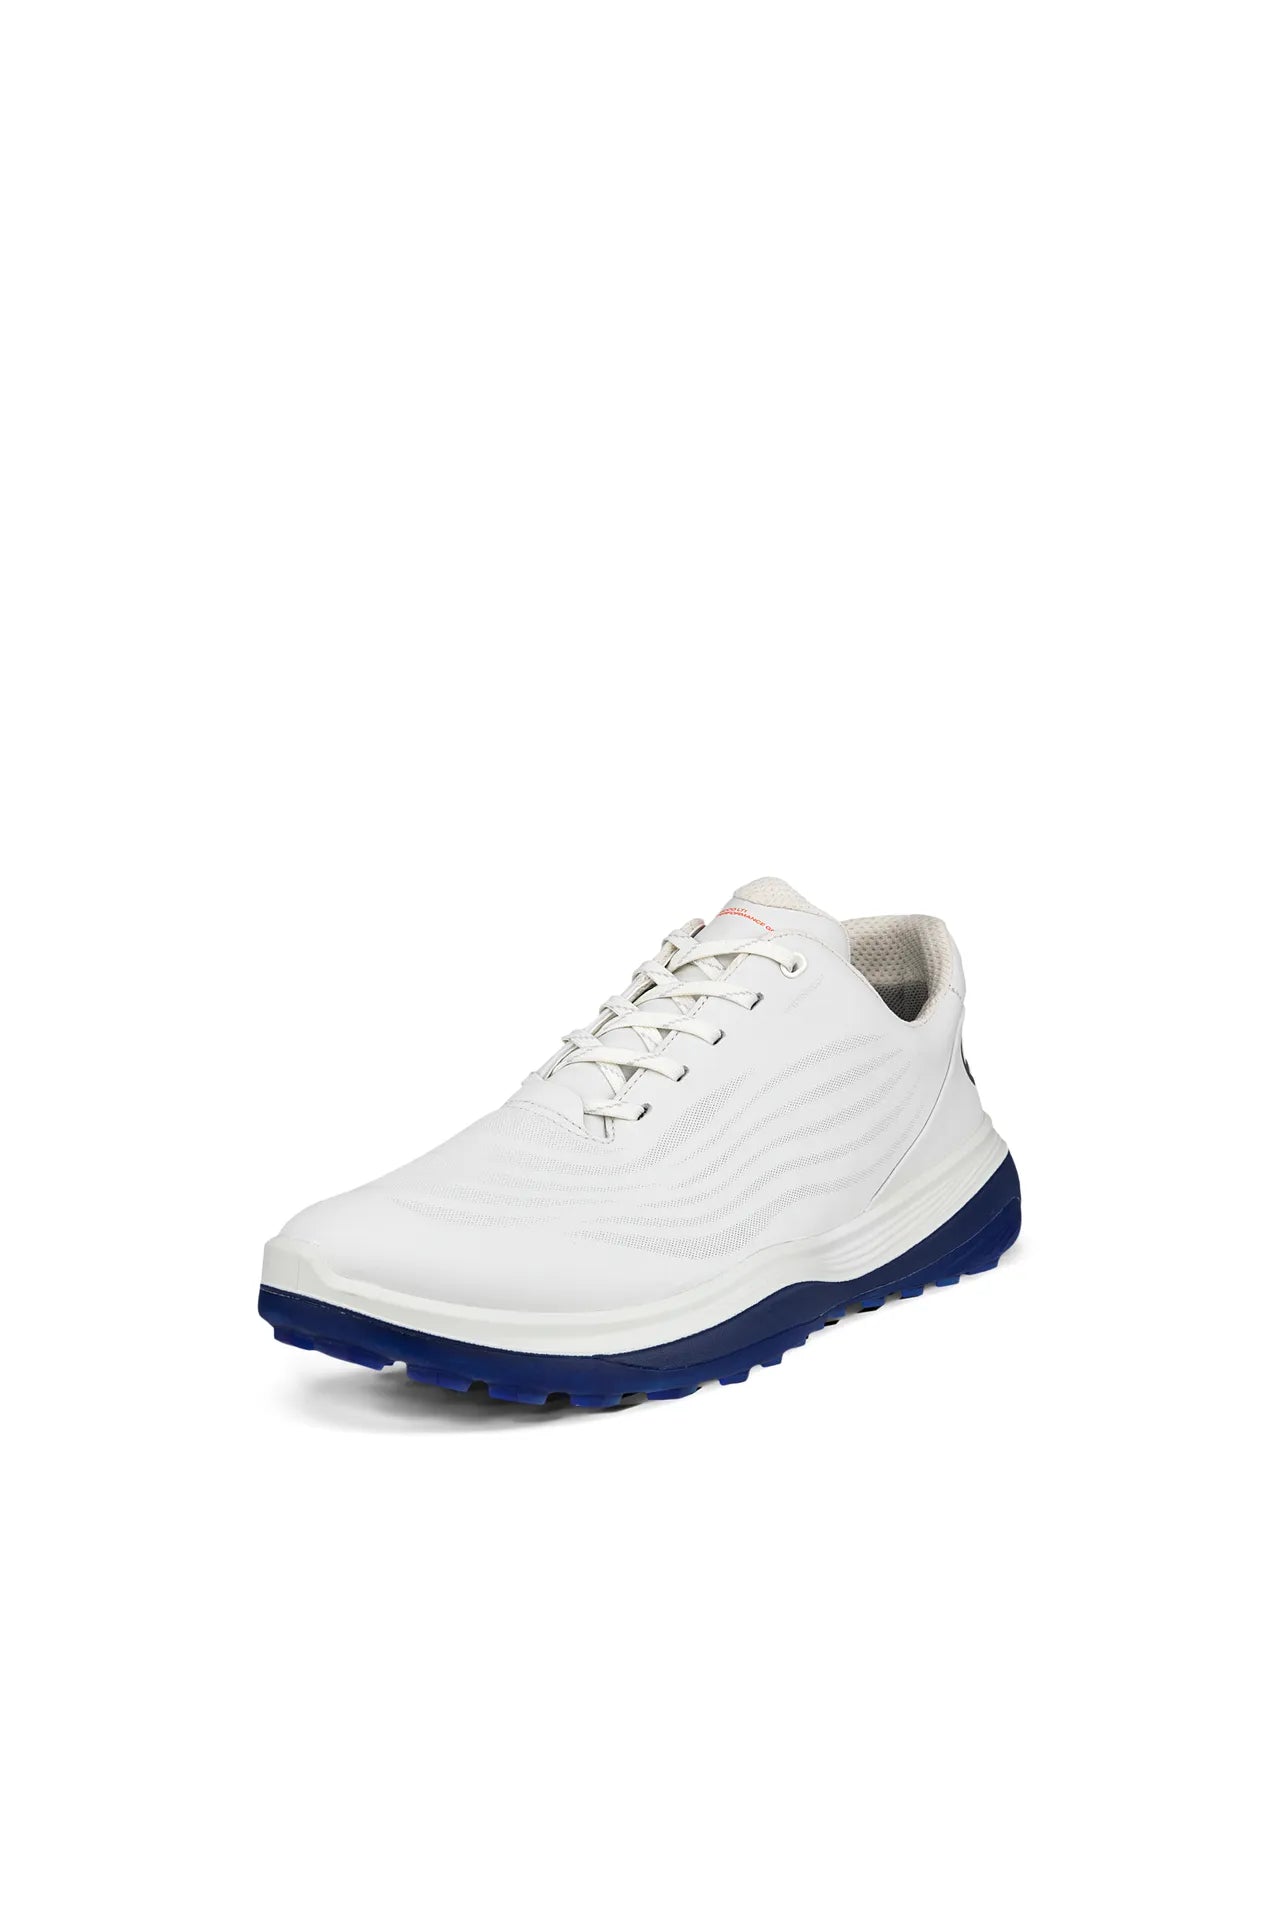 ECCO Golf Lt1 132264-11007 Mens White leather Golf shoes